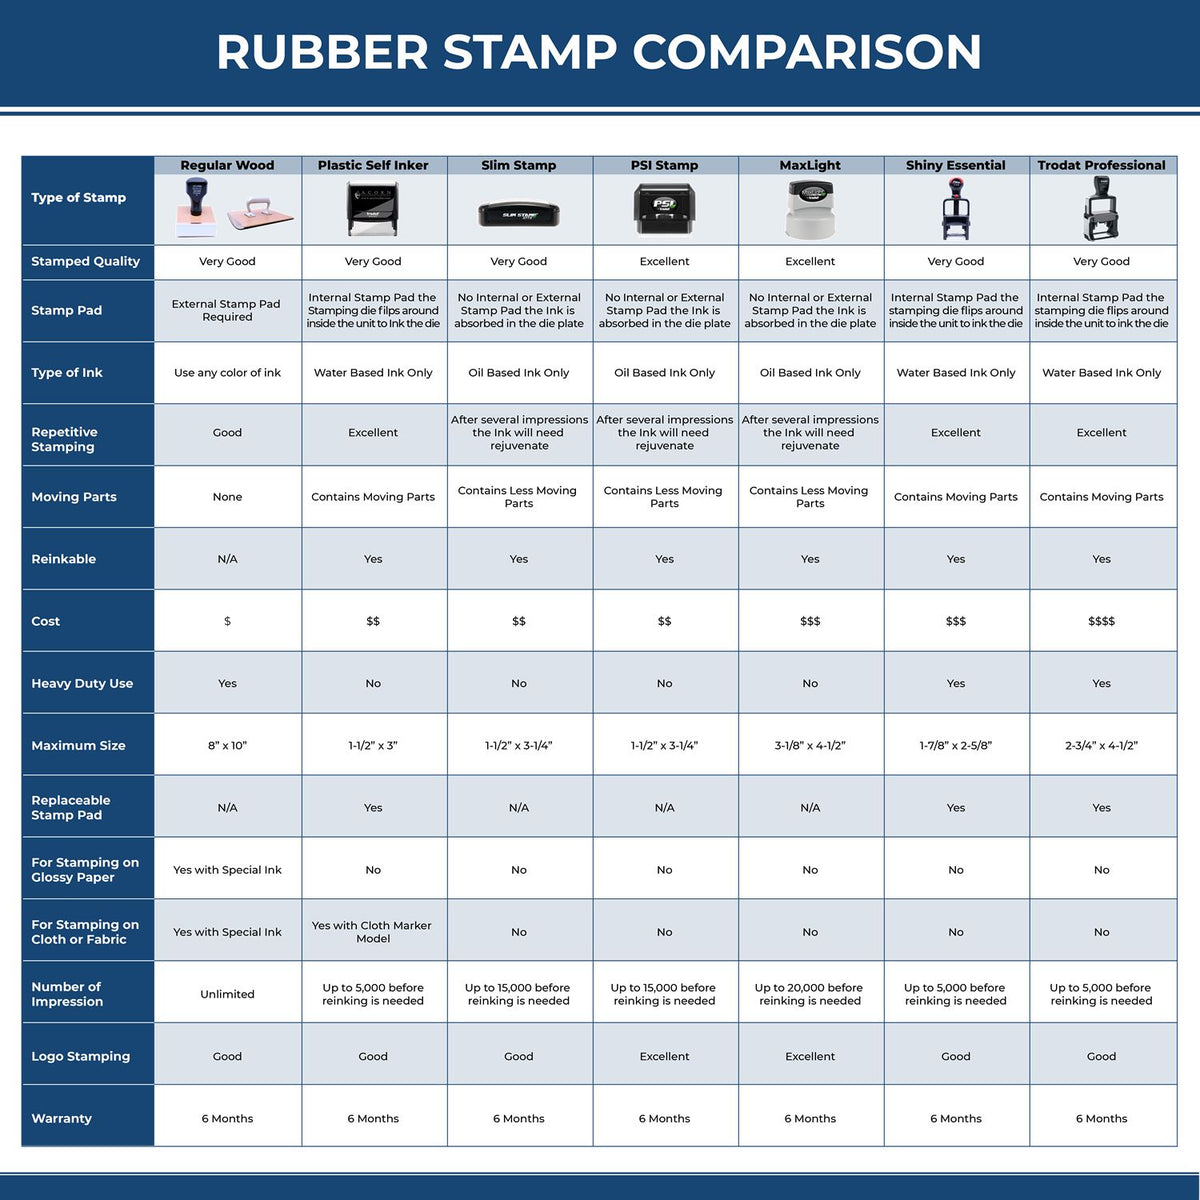 A comparison chart for the different types of mount models available for the Premium MaxLight Pre-Inked Oklahoma Engineering Stamp.